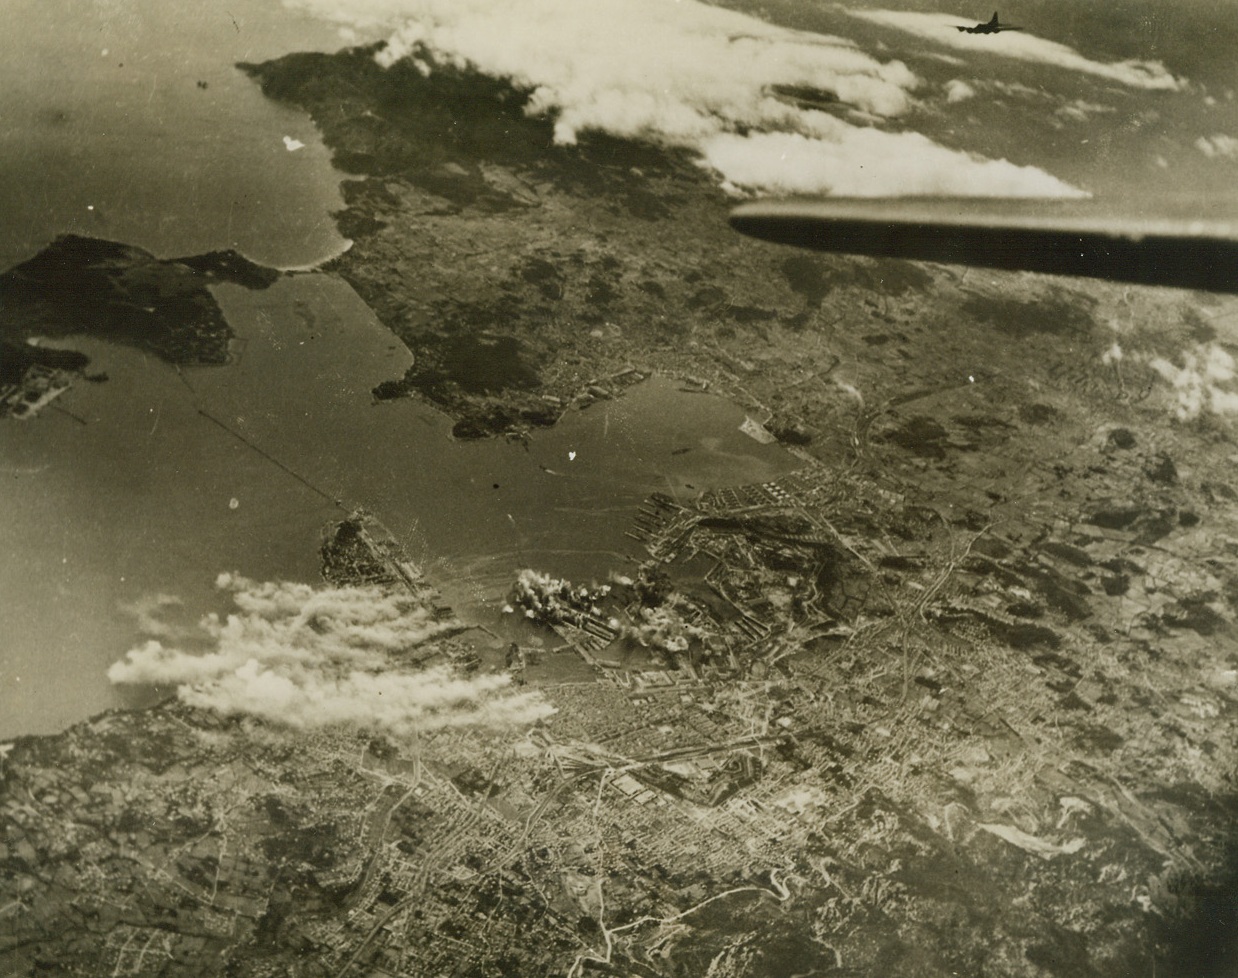 BLASTING SUB PENS AT TOULON, 3/8/1944. This photo, released in Washington today, shows bombs exploding on Nazi-held submarine pens (exact center of photo) in the harbor at Toulon, France, was taken by Major Gordon Sarre, of New York City, during a recent raid by heavy bombers of the U.S. Army Air Forces.  To the left of the exploding bombs (in photo) columns of smoke mark burning installations. Today, it was announced that heavy U.S. bombers had again blasted Toulon. Credit: USAAF photo from Acme;